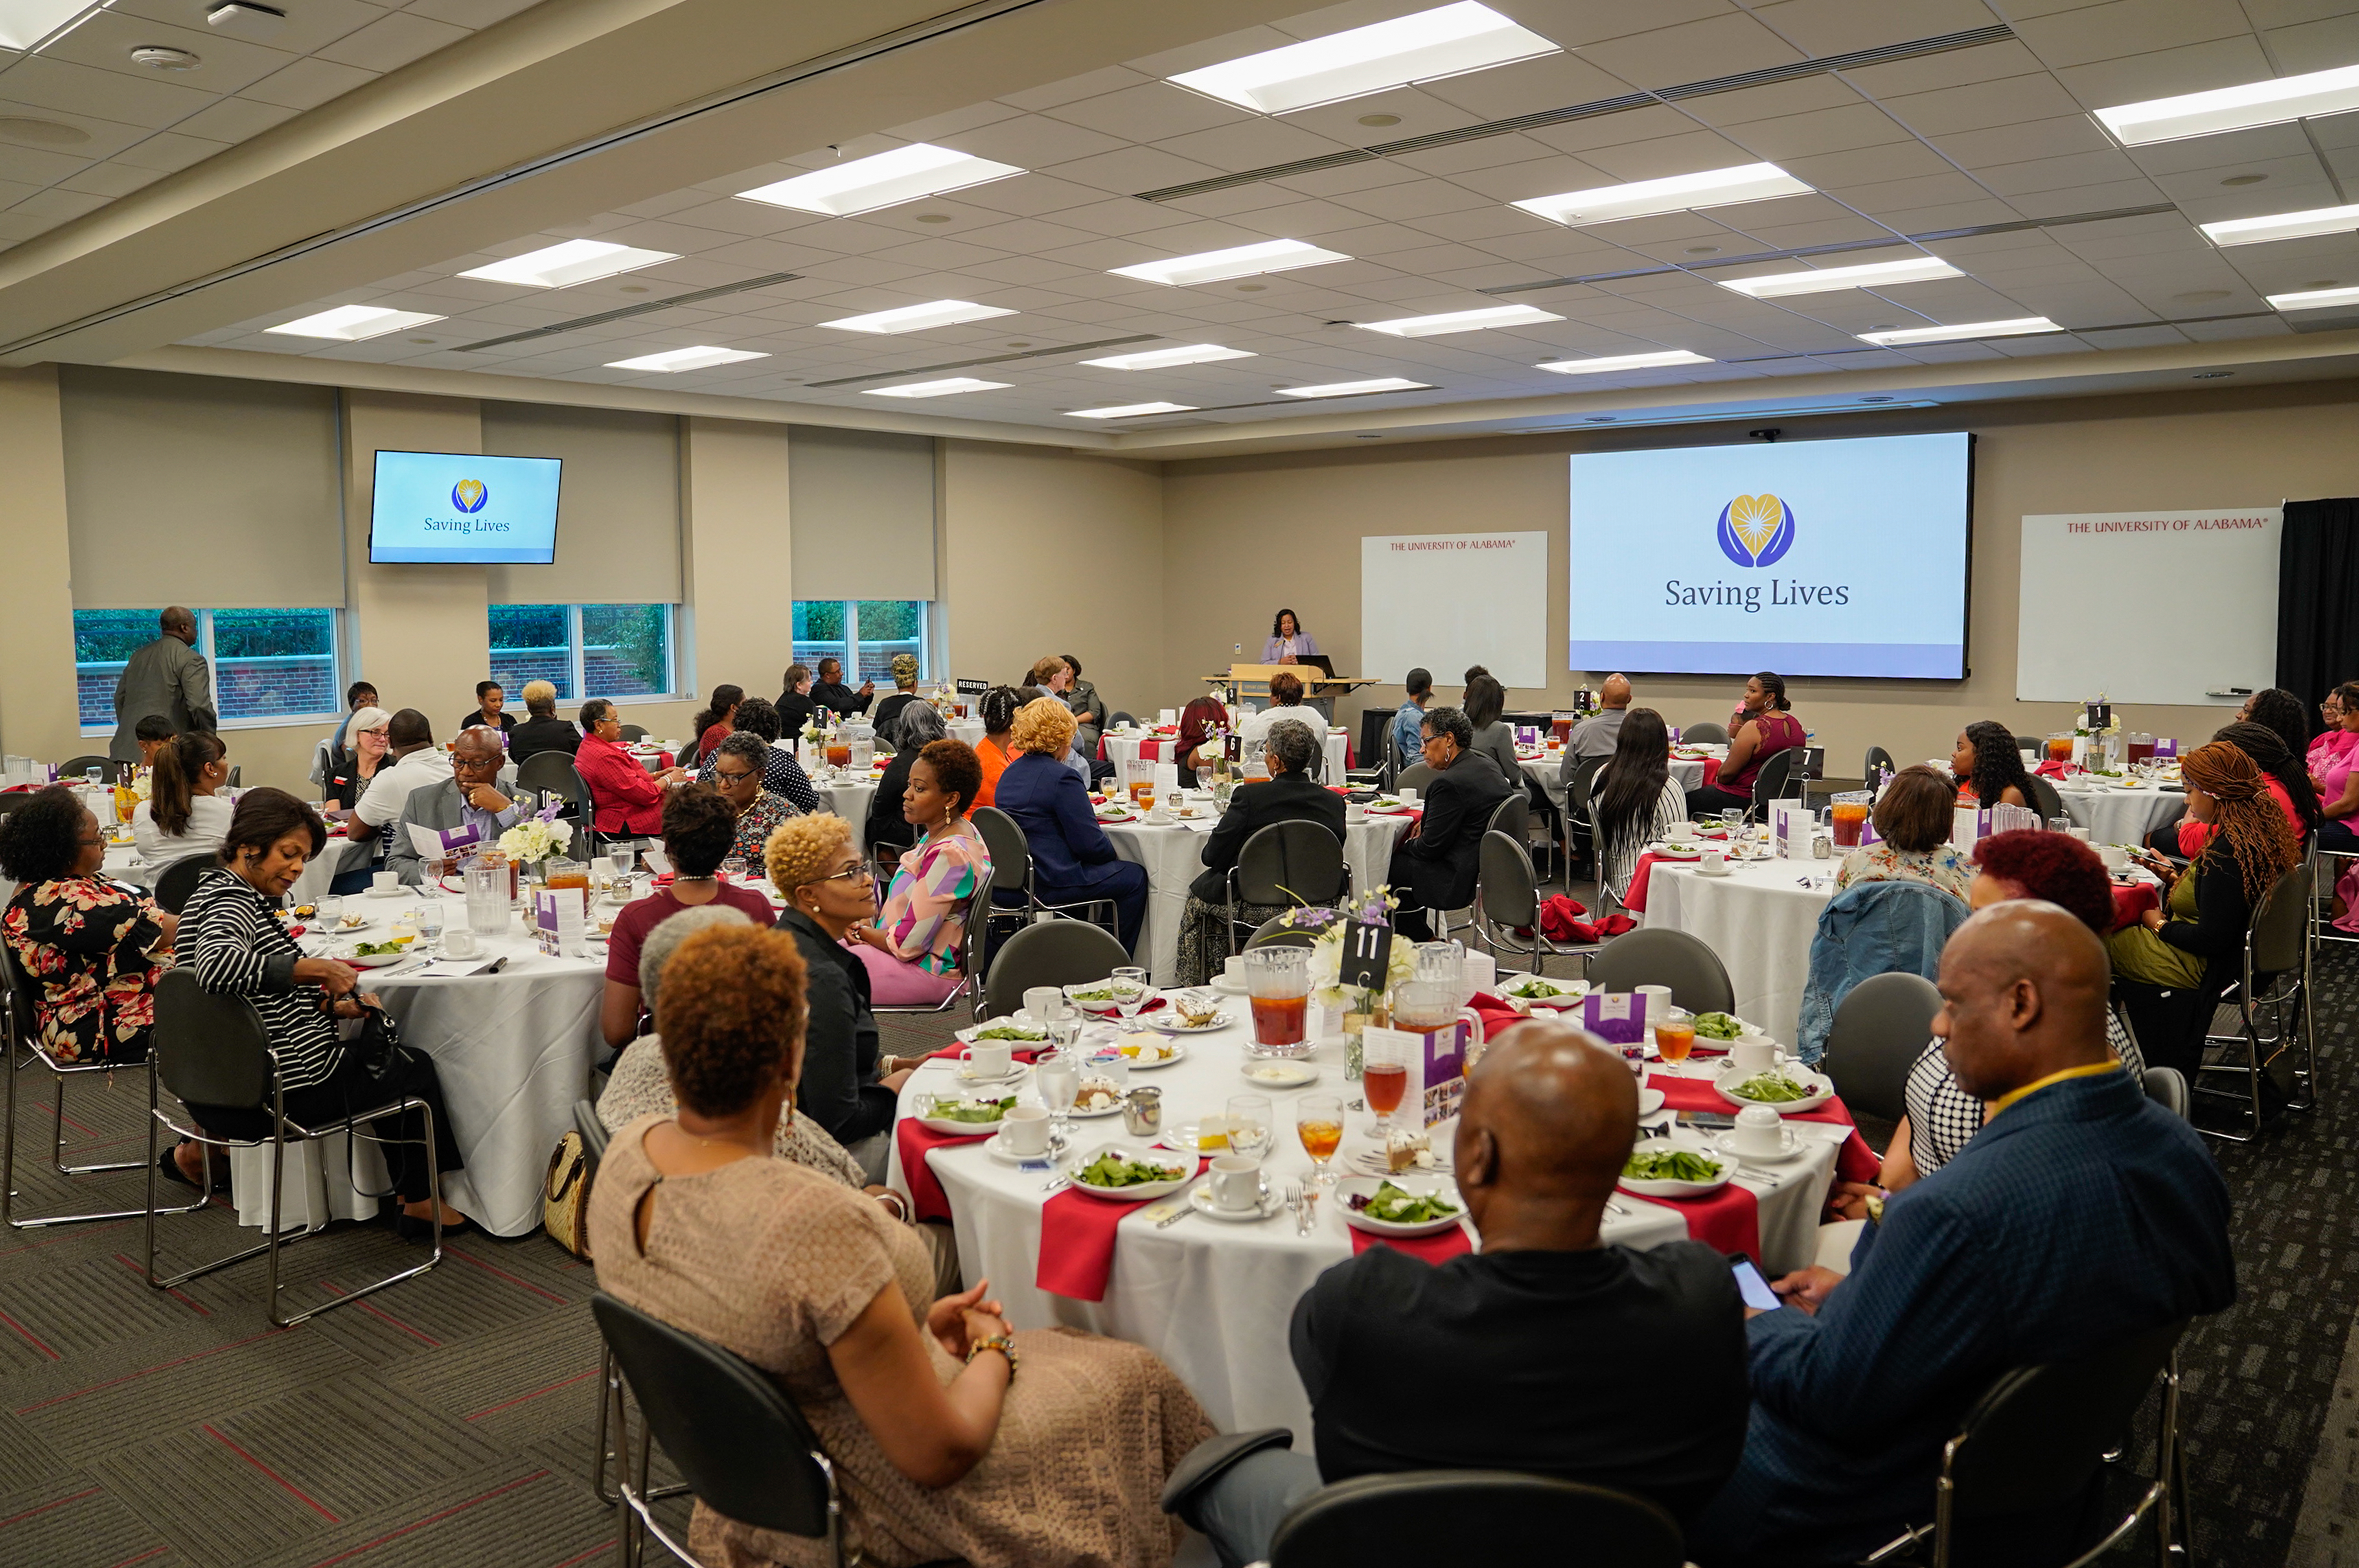 Faith communities enjoy dinner and networking during the Saving Lives event.